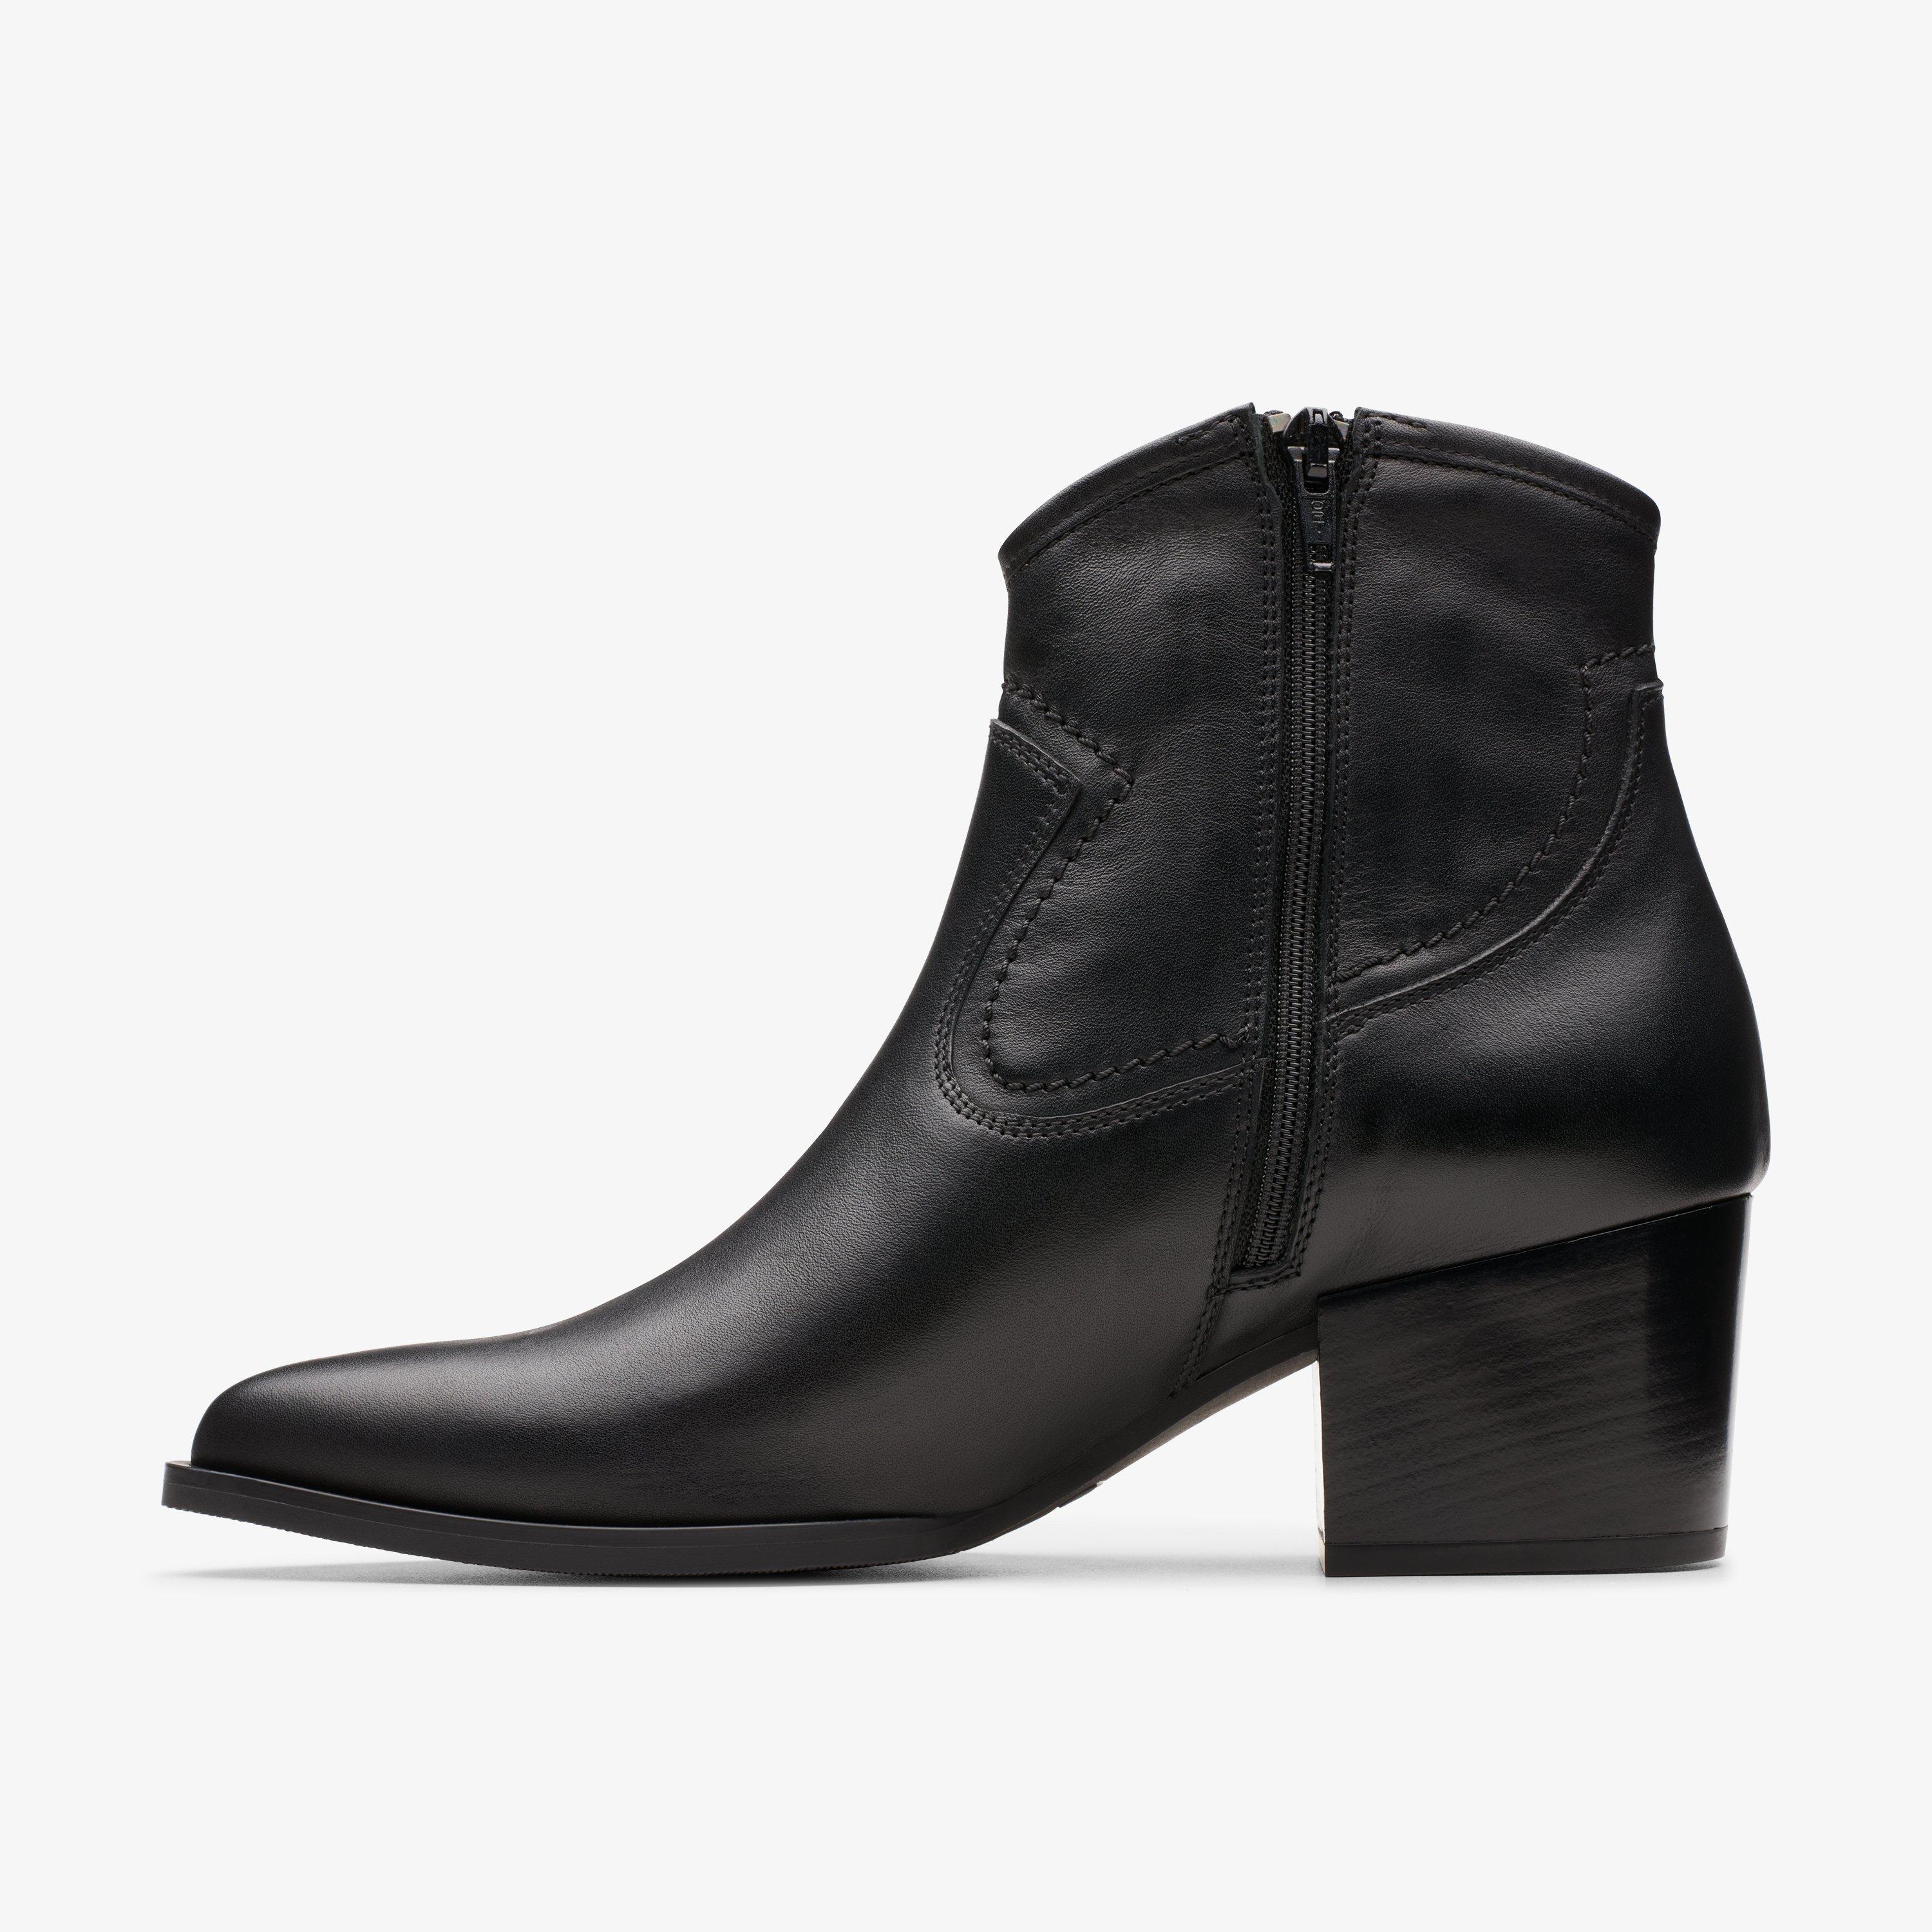 Womens Boots & Booties - Ankle & Knee High Boots | Clarks US